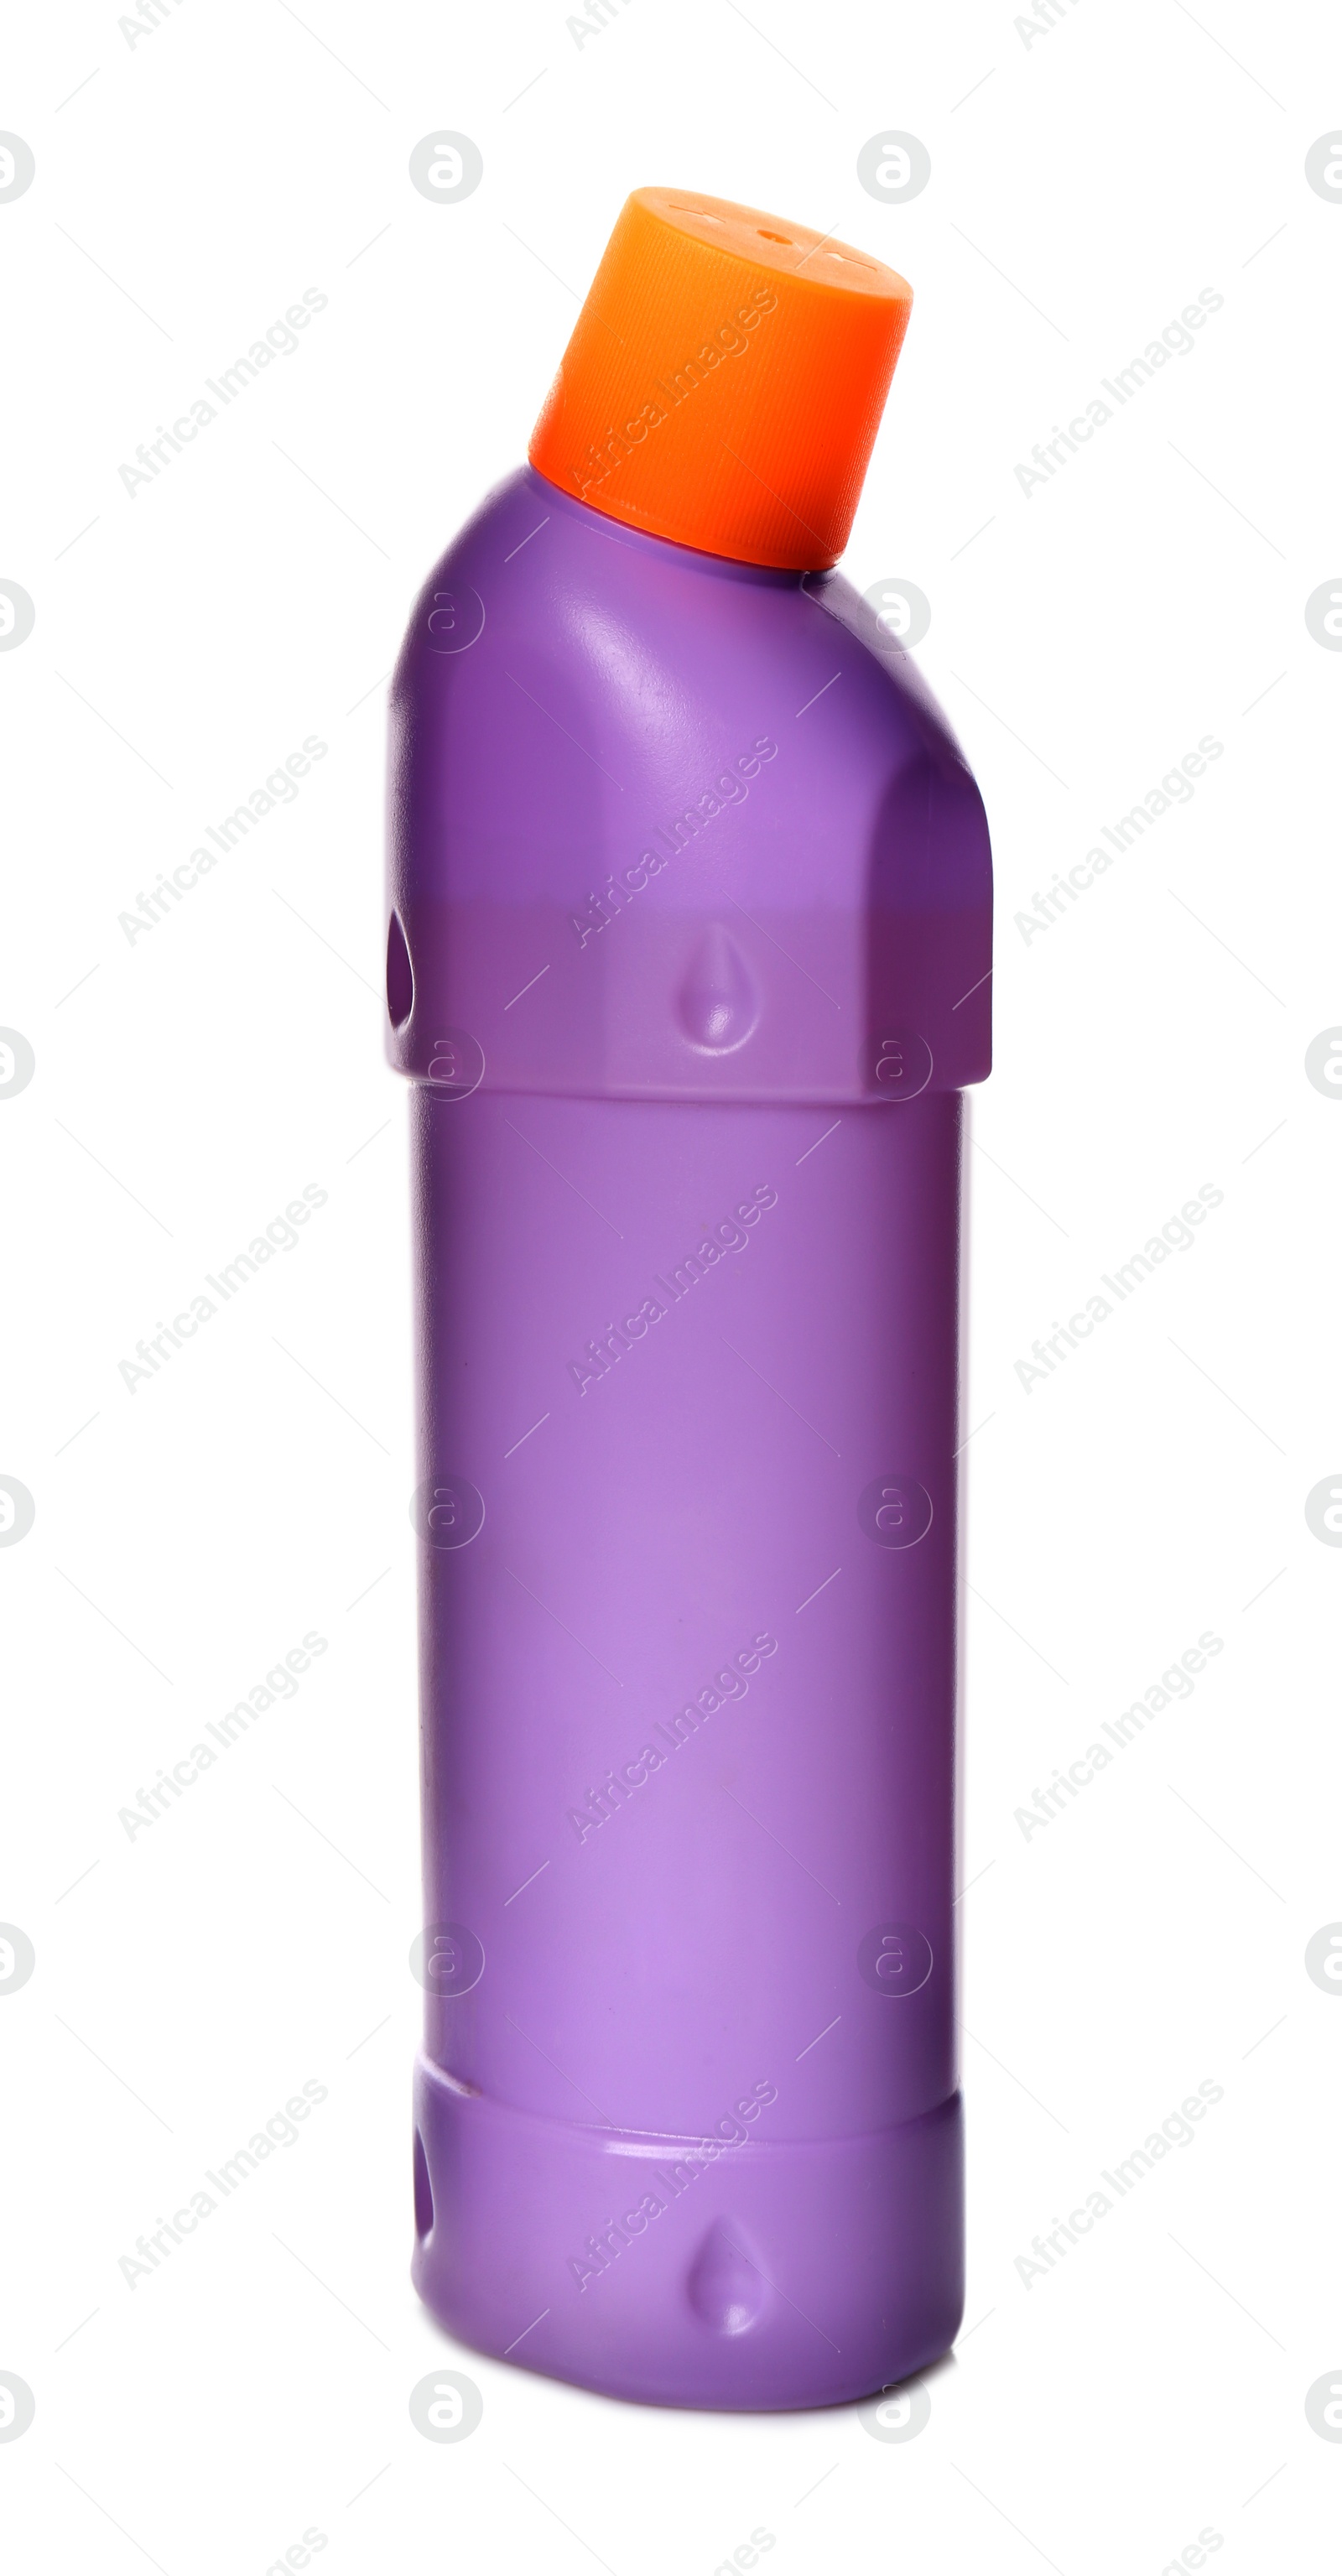 Photo of Purple bottle of cleaning product isolated on white